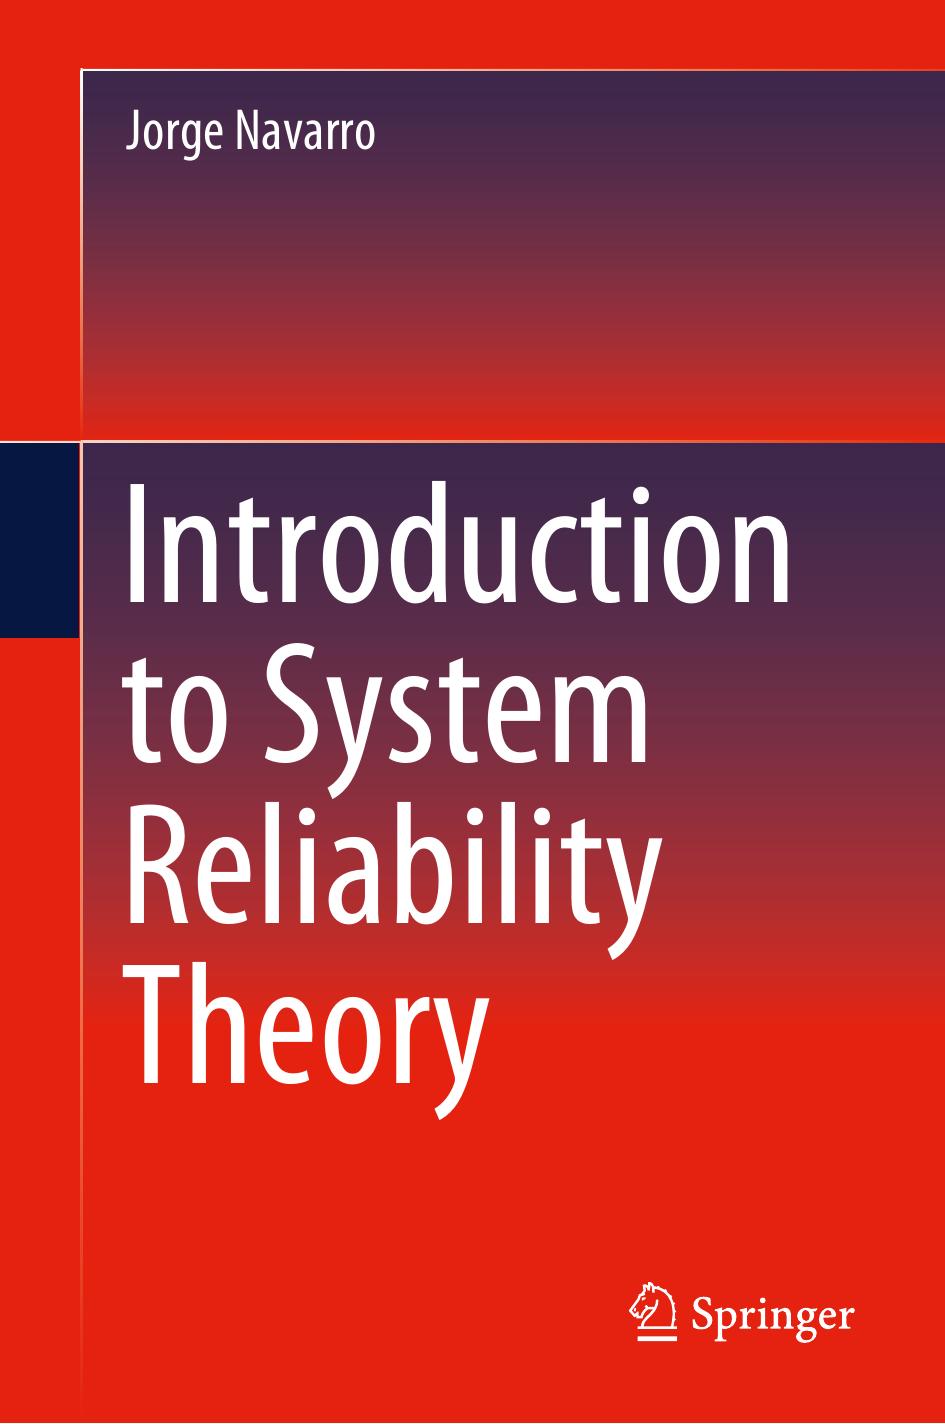 Introduction to System Reliability Theory by Jorge Navarro